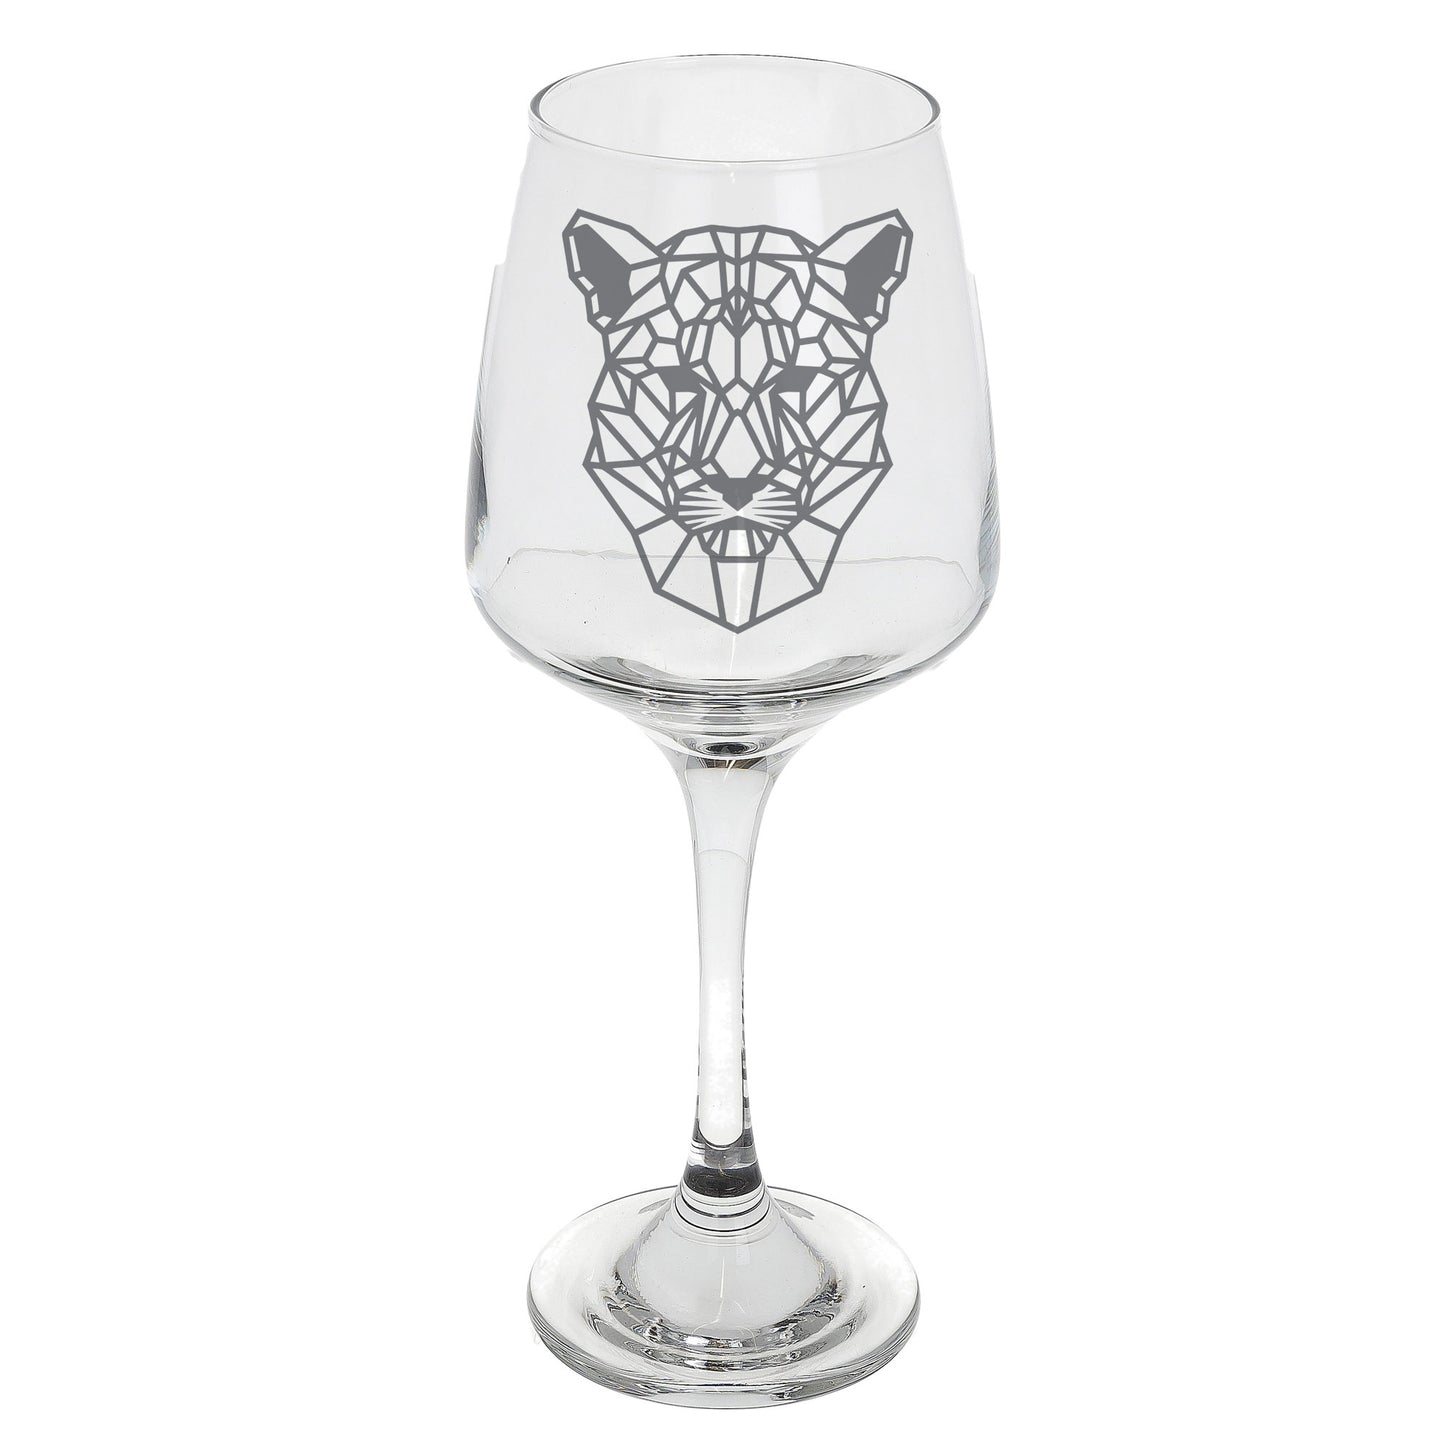 Panther Engraved Wine Glass  - Always Looking Good -   